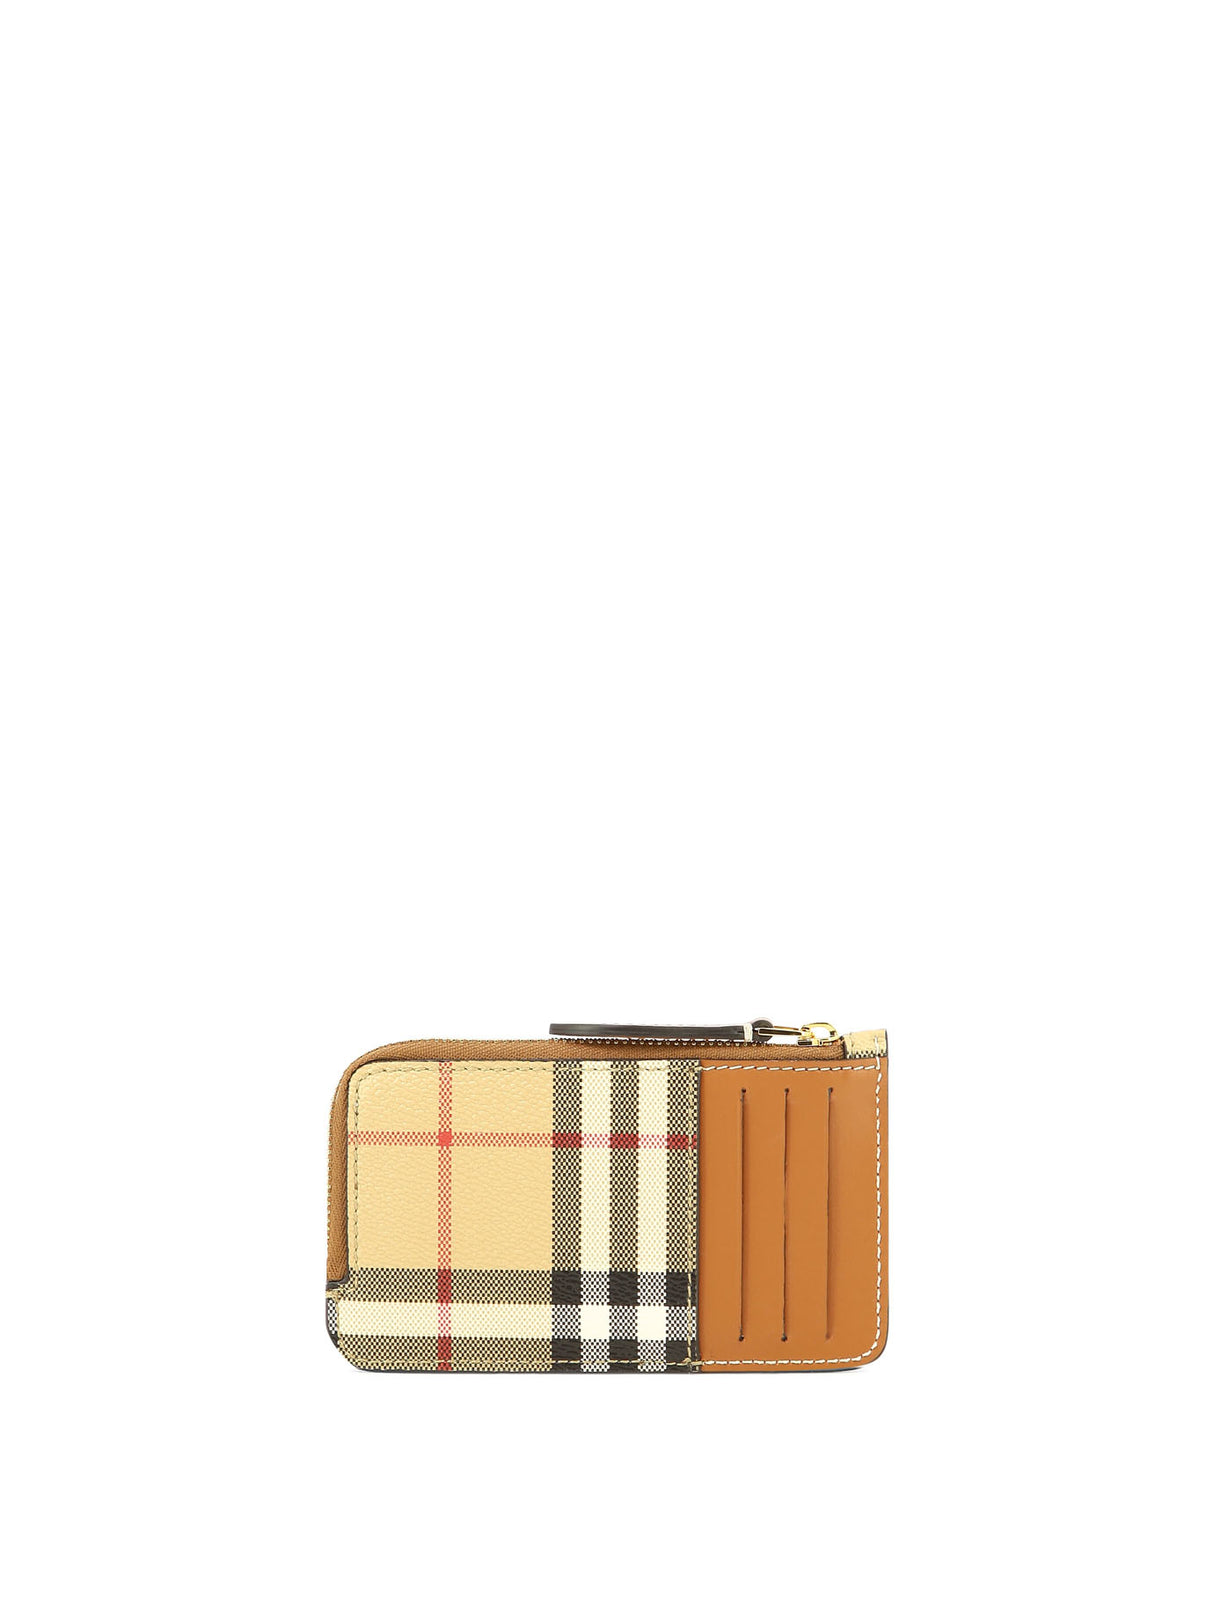 BURBERRY Beige Check and Leather Zip Card Case